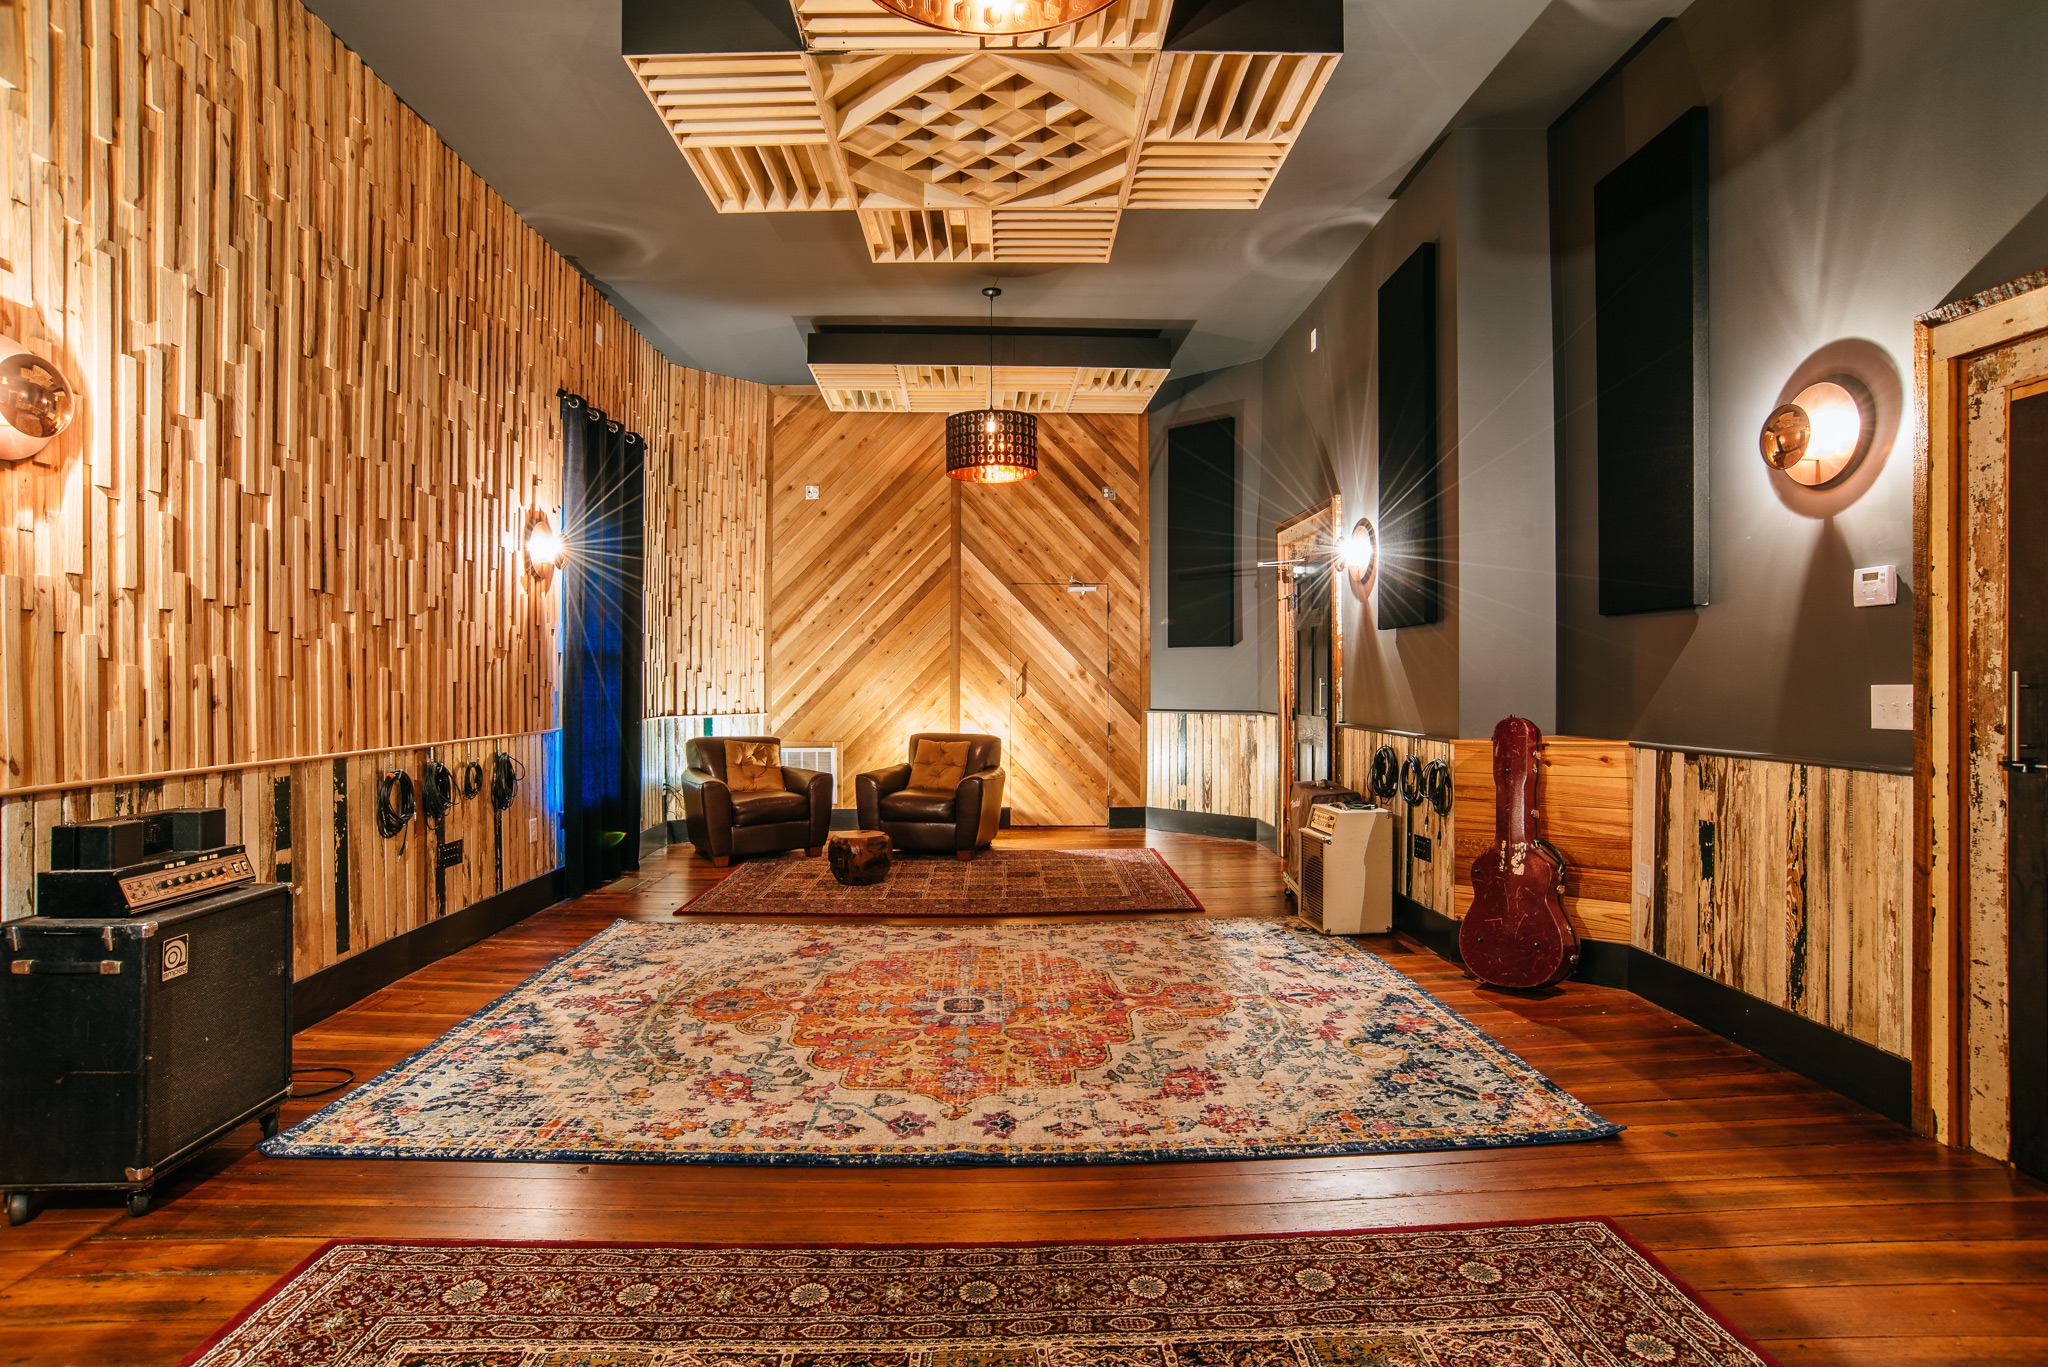 The Sound Wall - Listening Room 